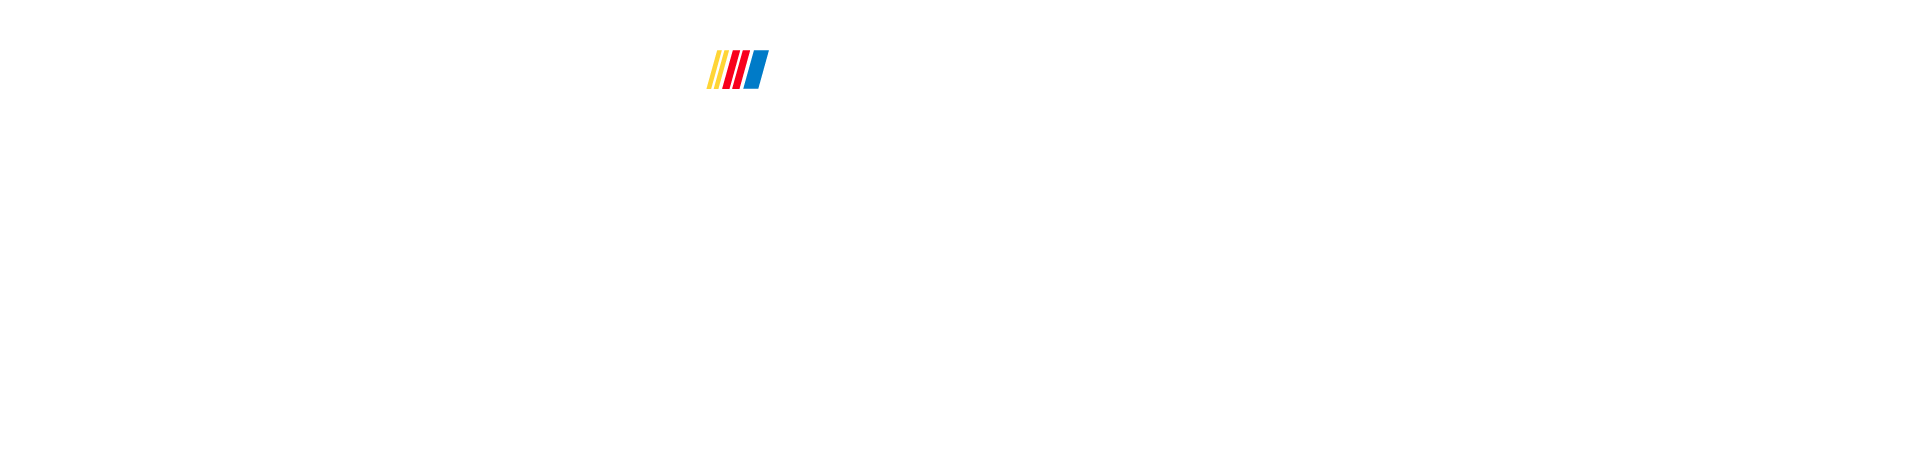 NASCAR Next Gen is Now, Try it Today on iRacing!